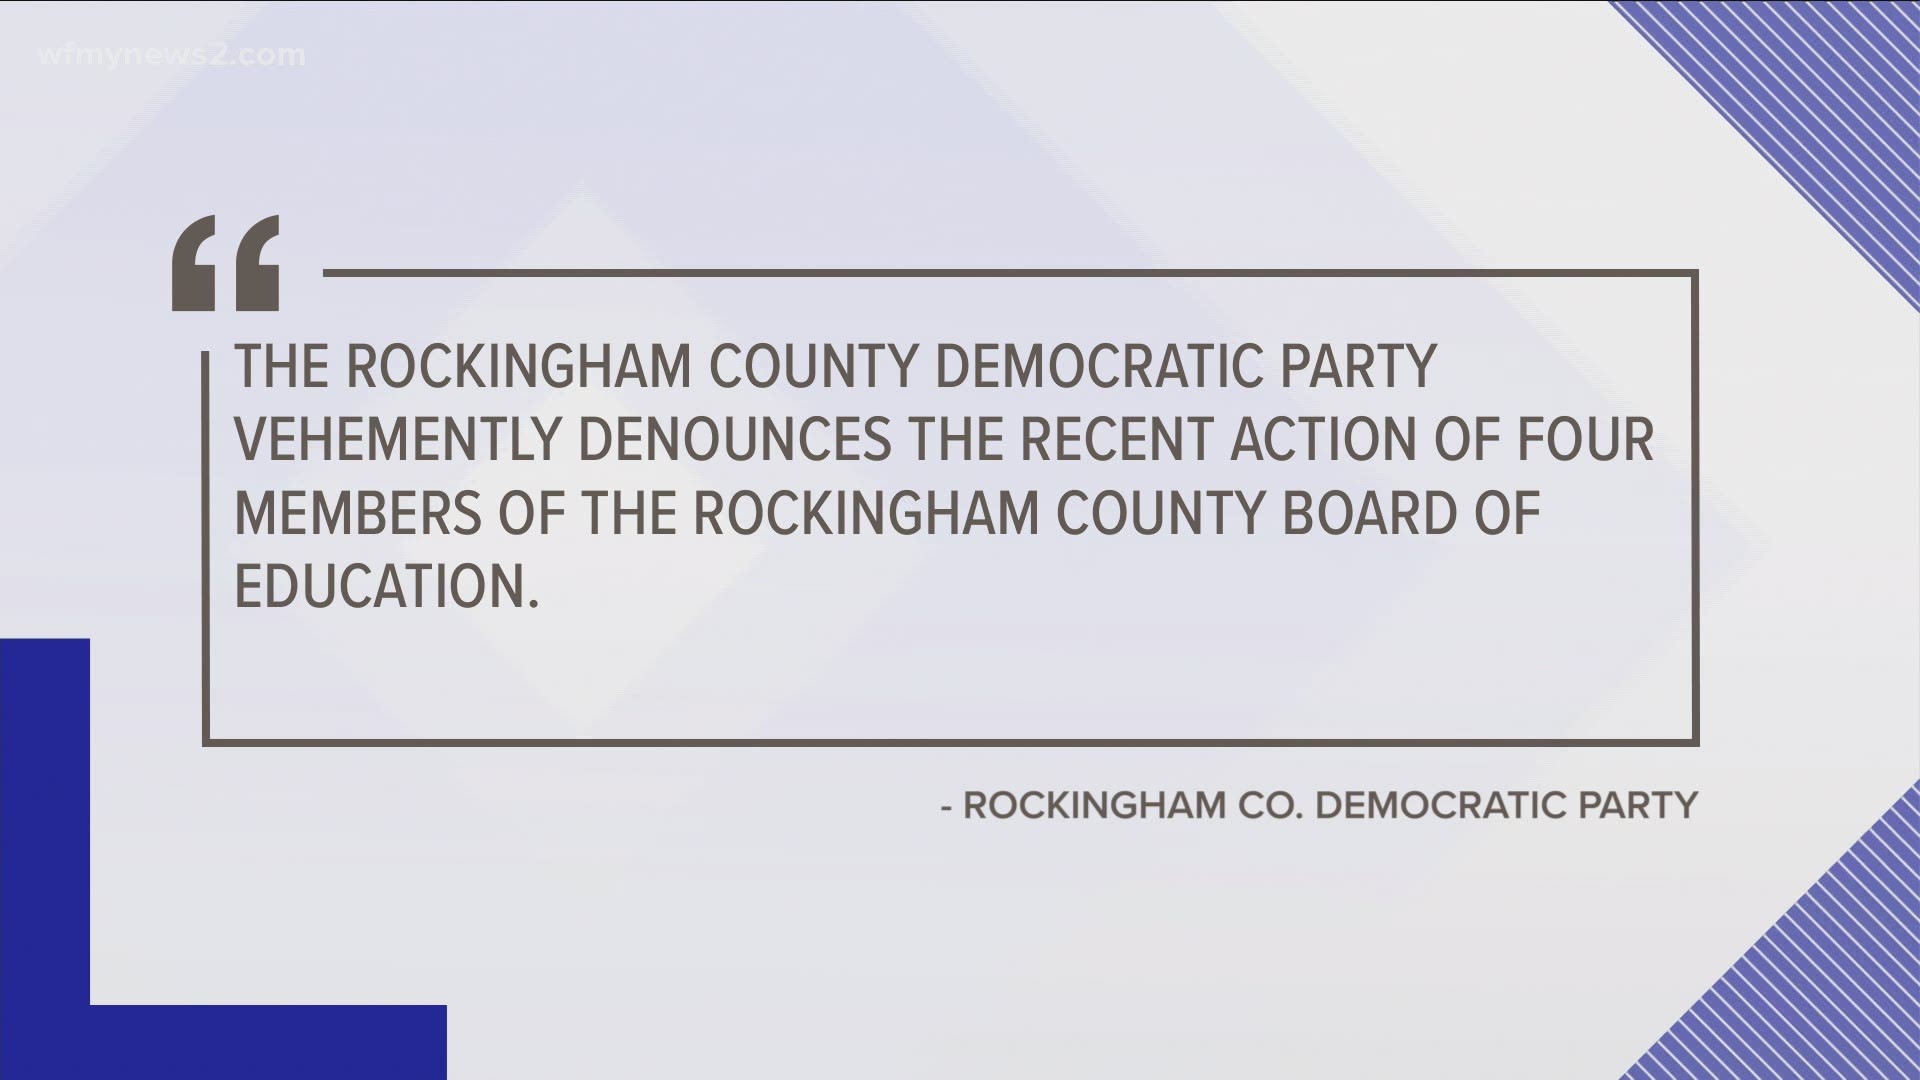 Two organizations have denounced the Rockingham County Board of Education’s decision to fire Superintendent Dr. Rodney Shotwell.